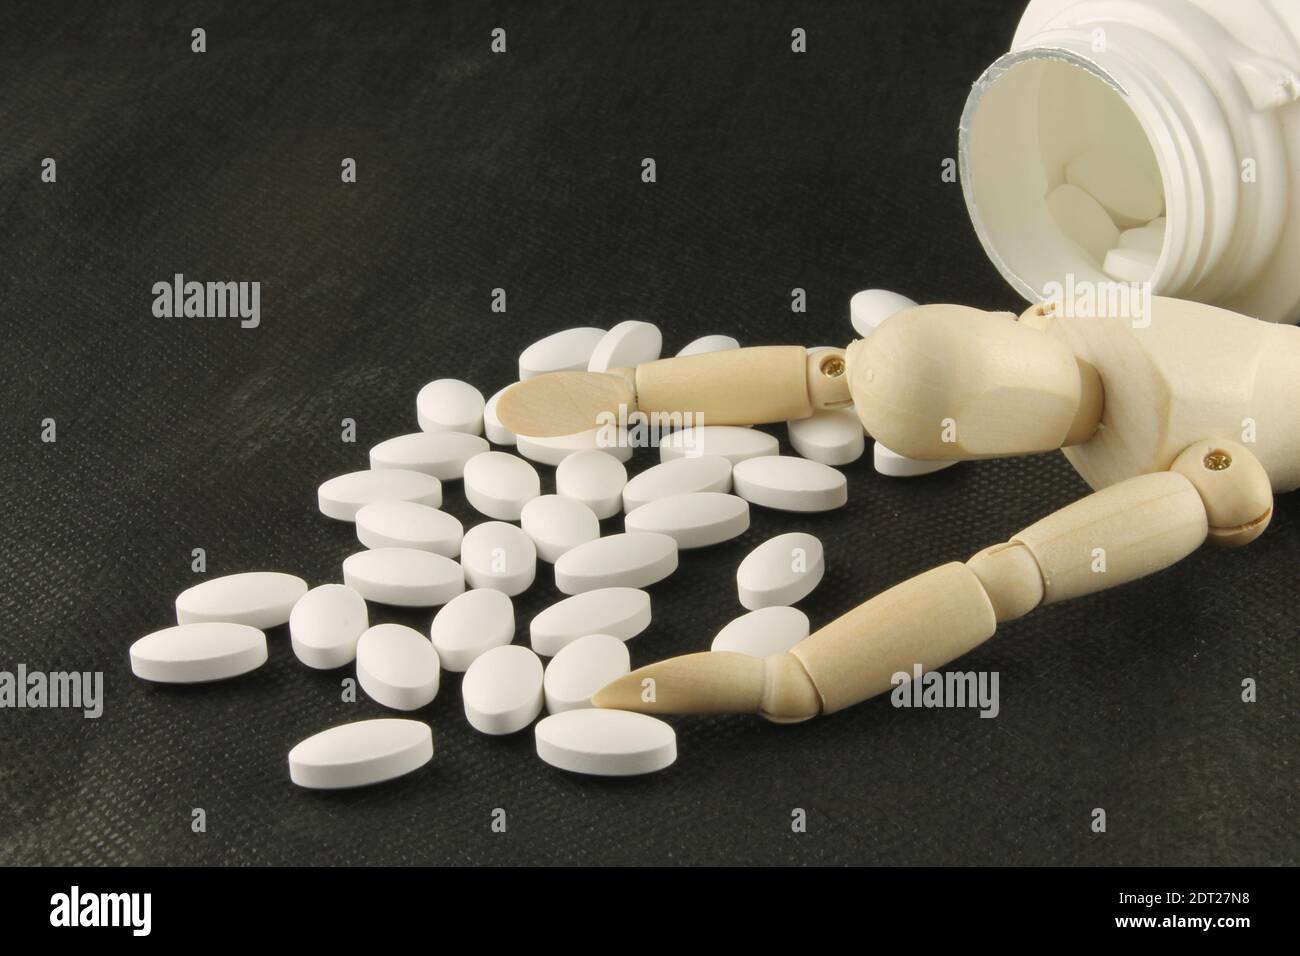 Manikin lying down with hands outstretched surrounded by white tablets on black background, Overdose prescription medication concept with copy space Stock Photo